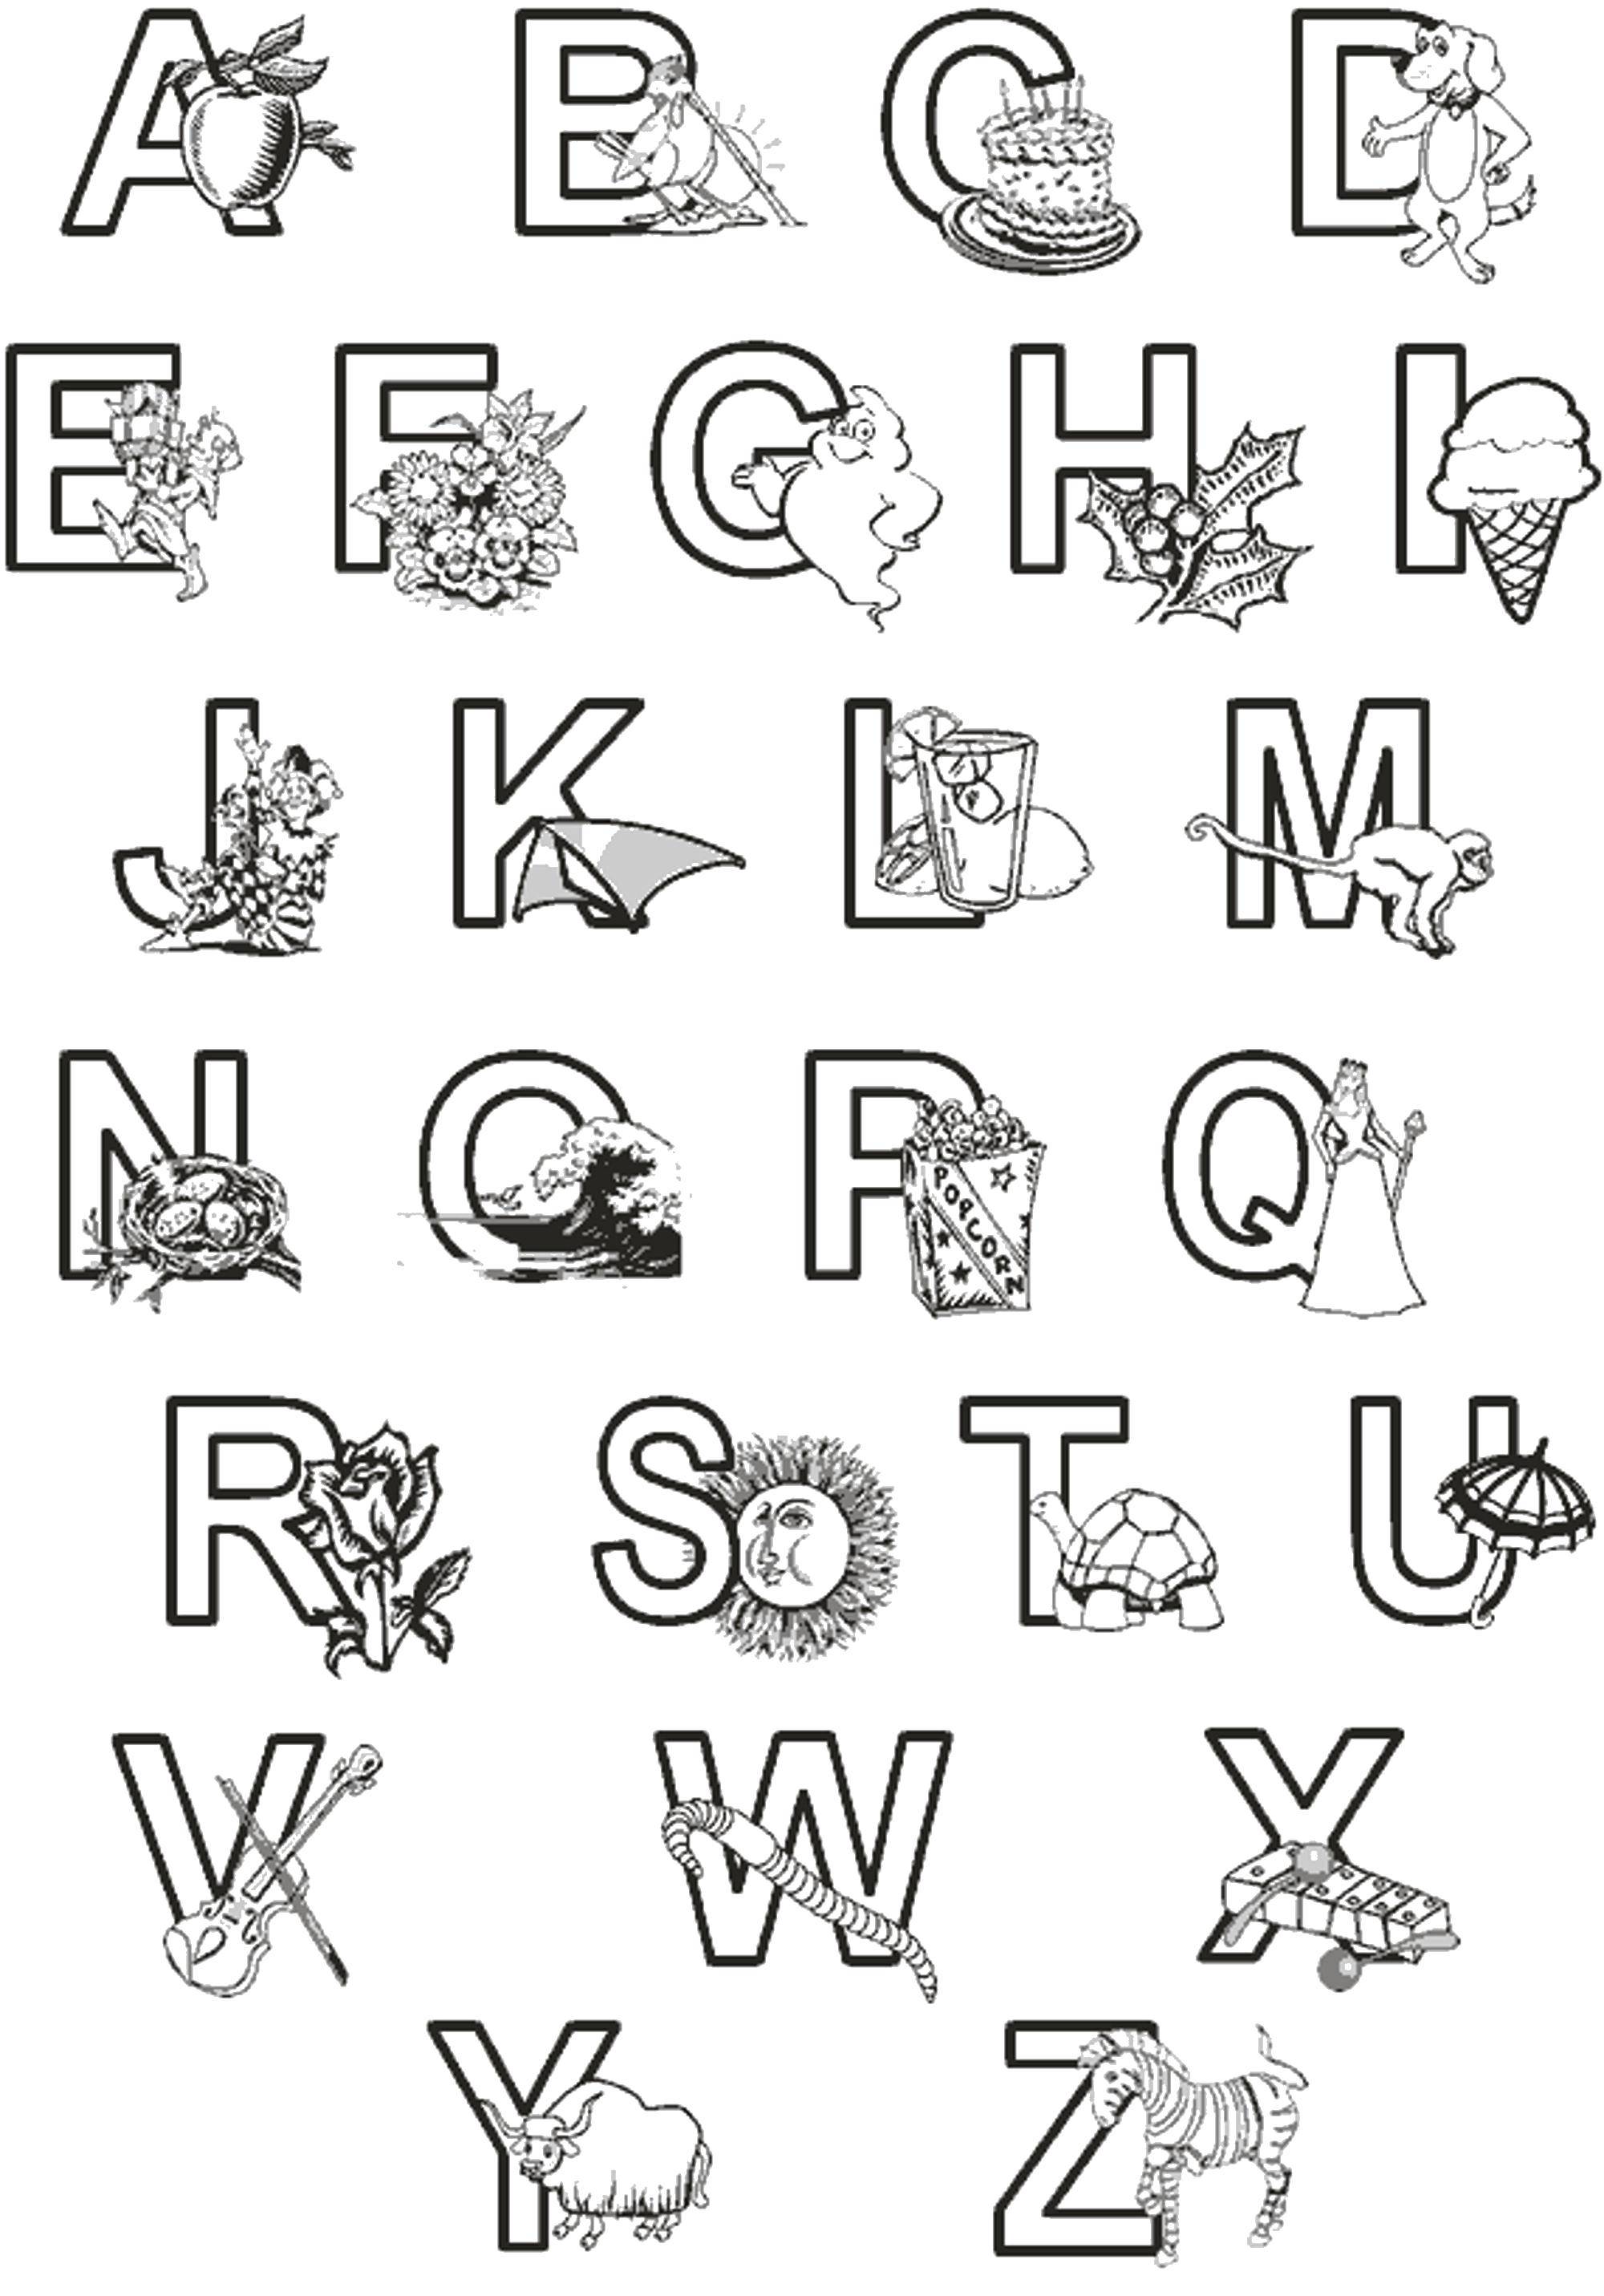 Coloring English alphabet. Category English alphabet. Tags:  The alphabet, letters, words.